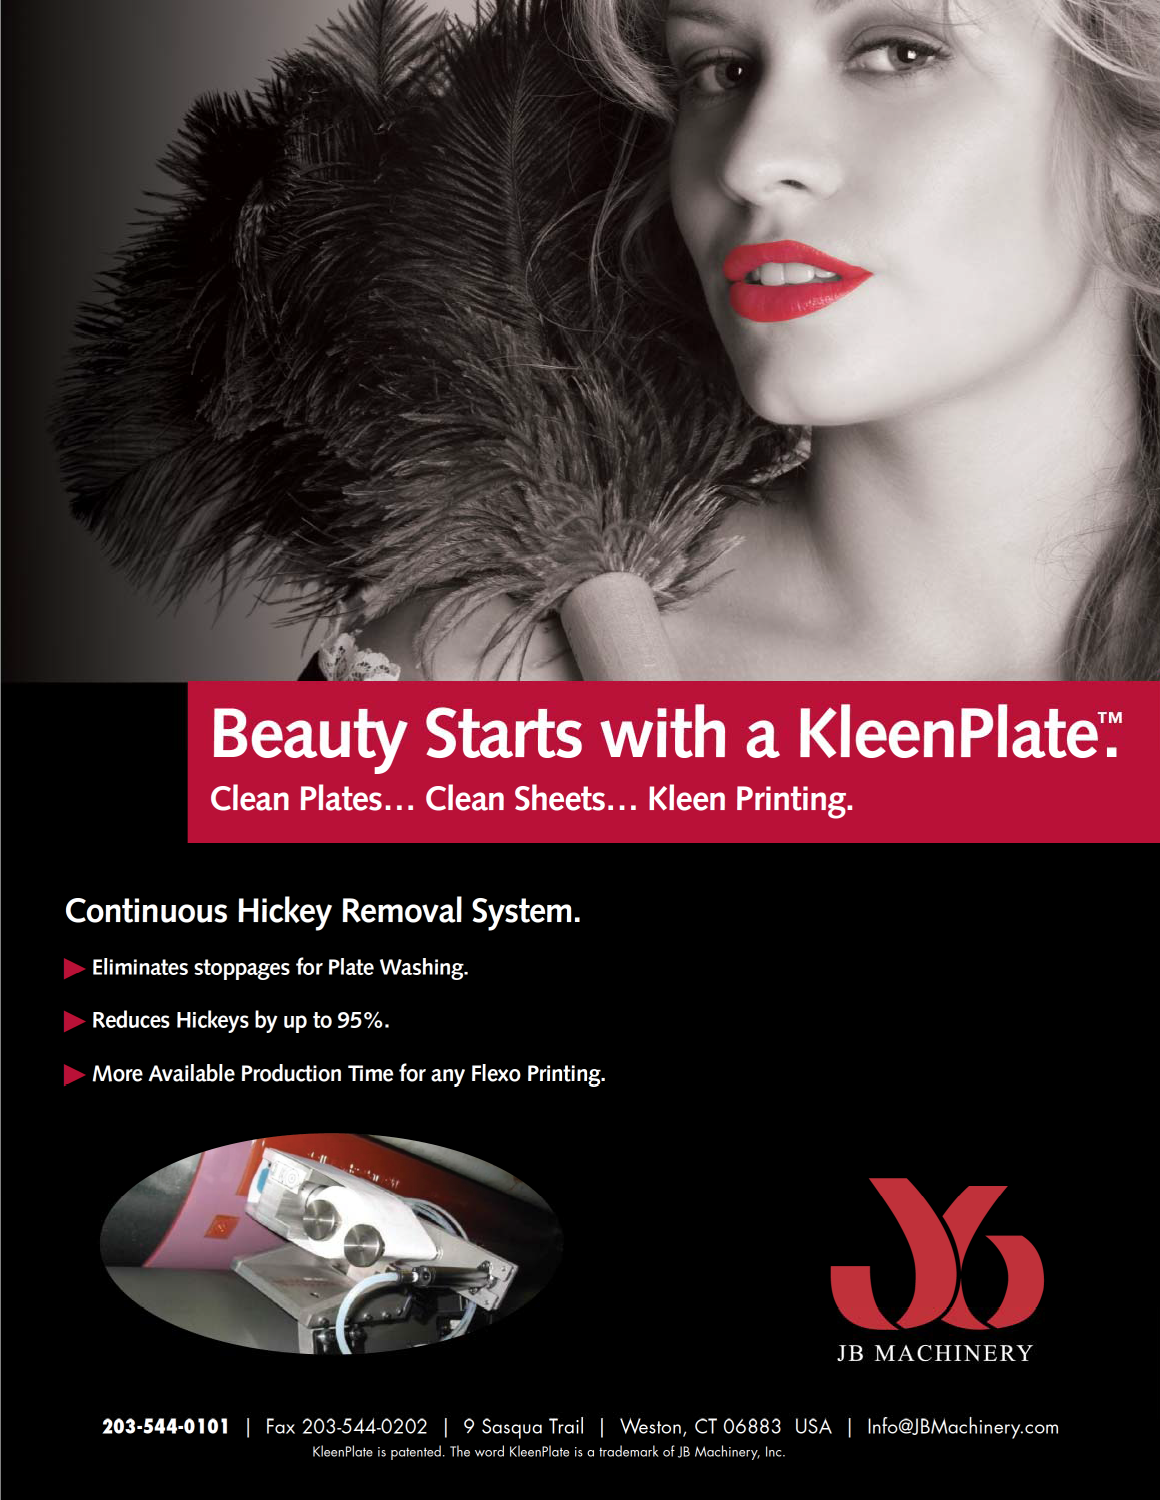 Learn more by viewing the JB Machinery KleenPlate Brochure